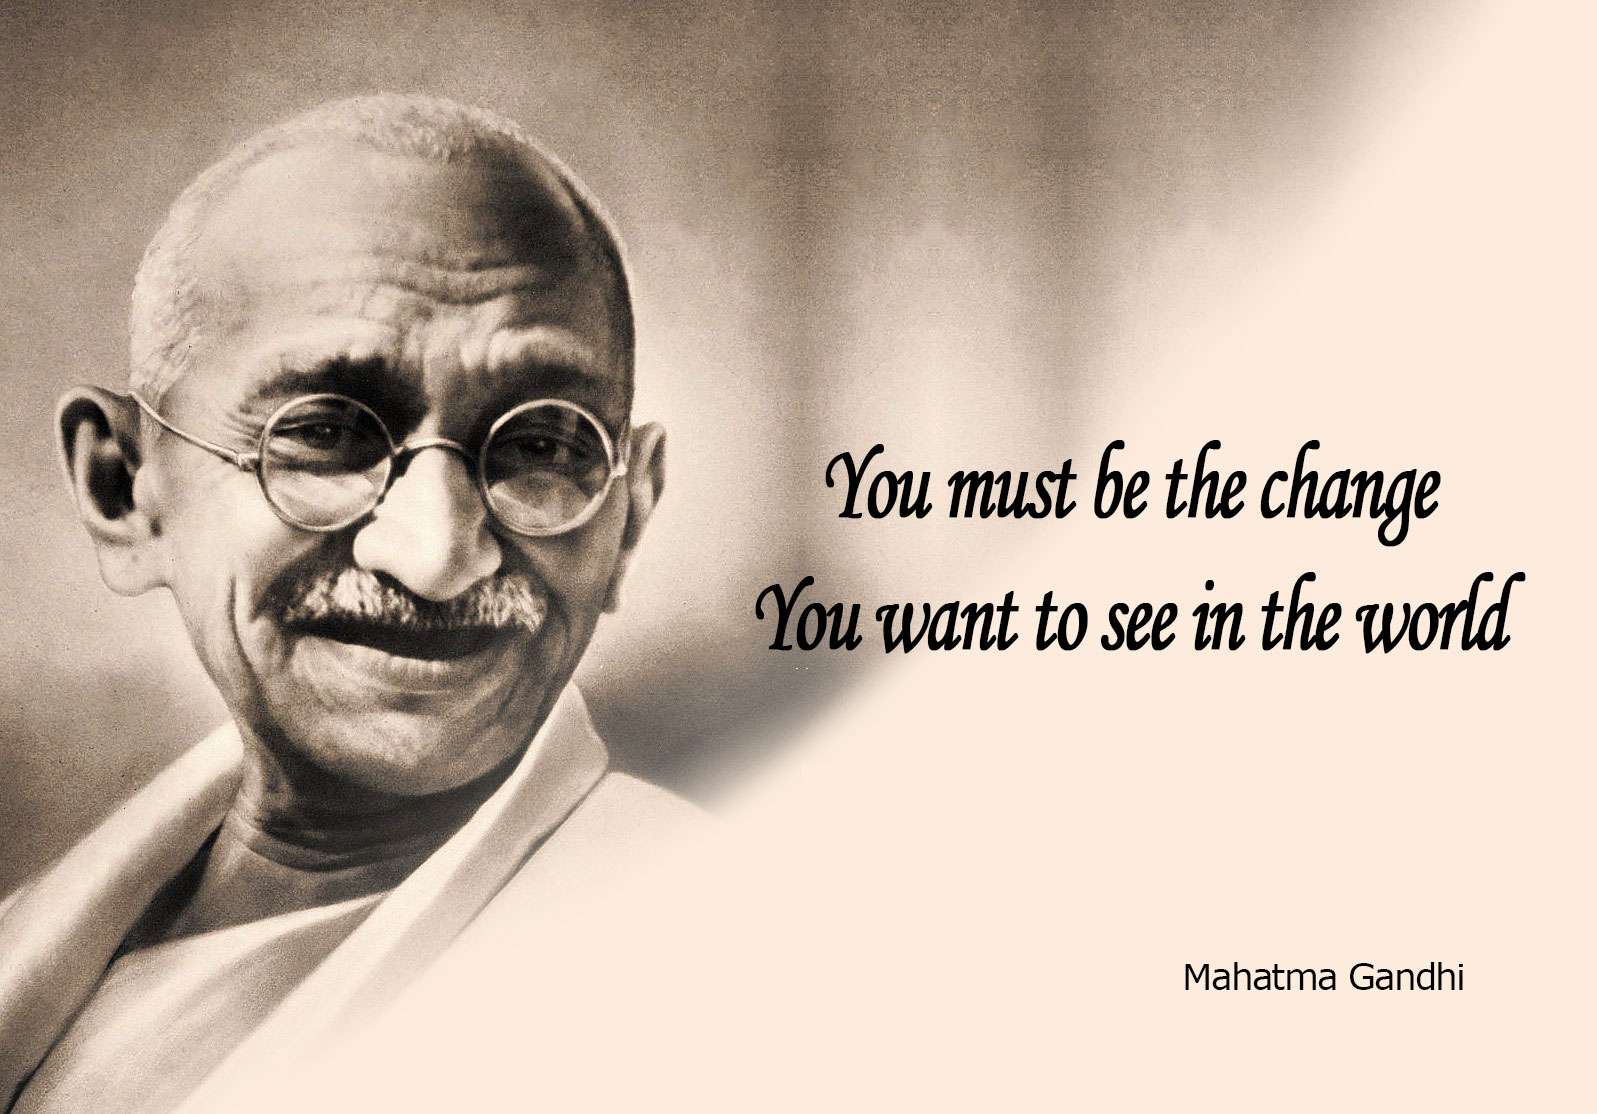 Reflections on Gandhi quote post